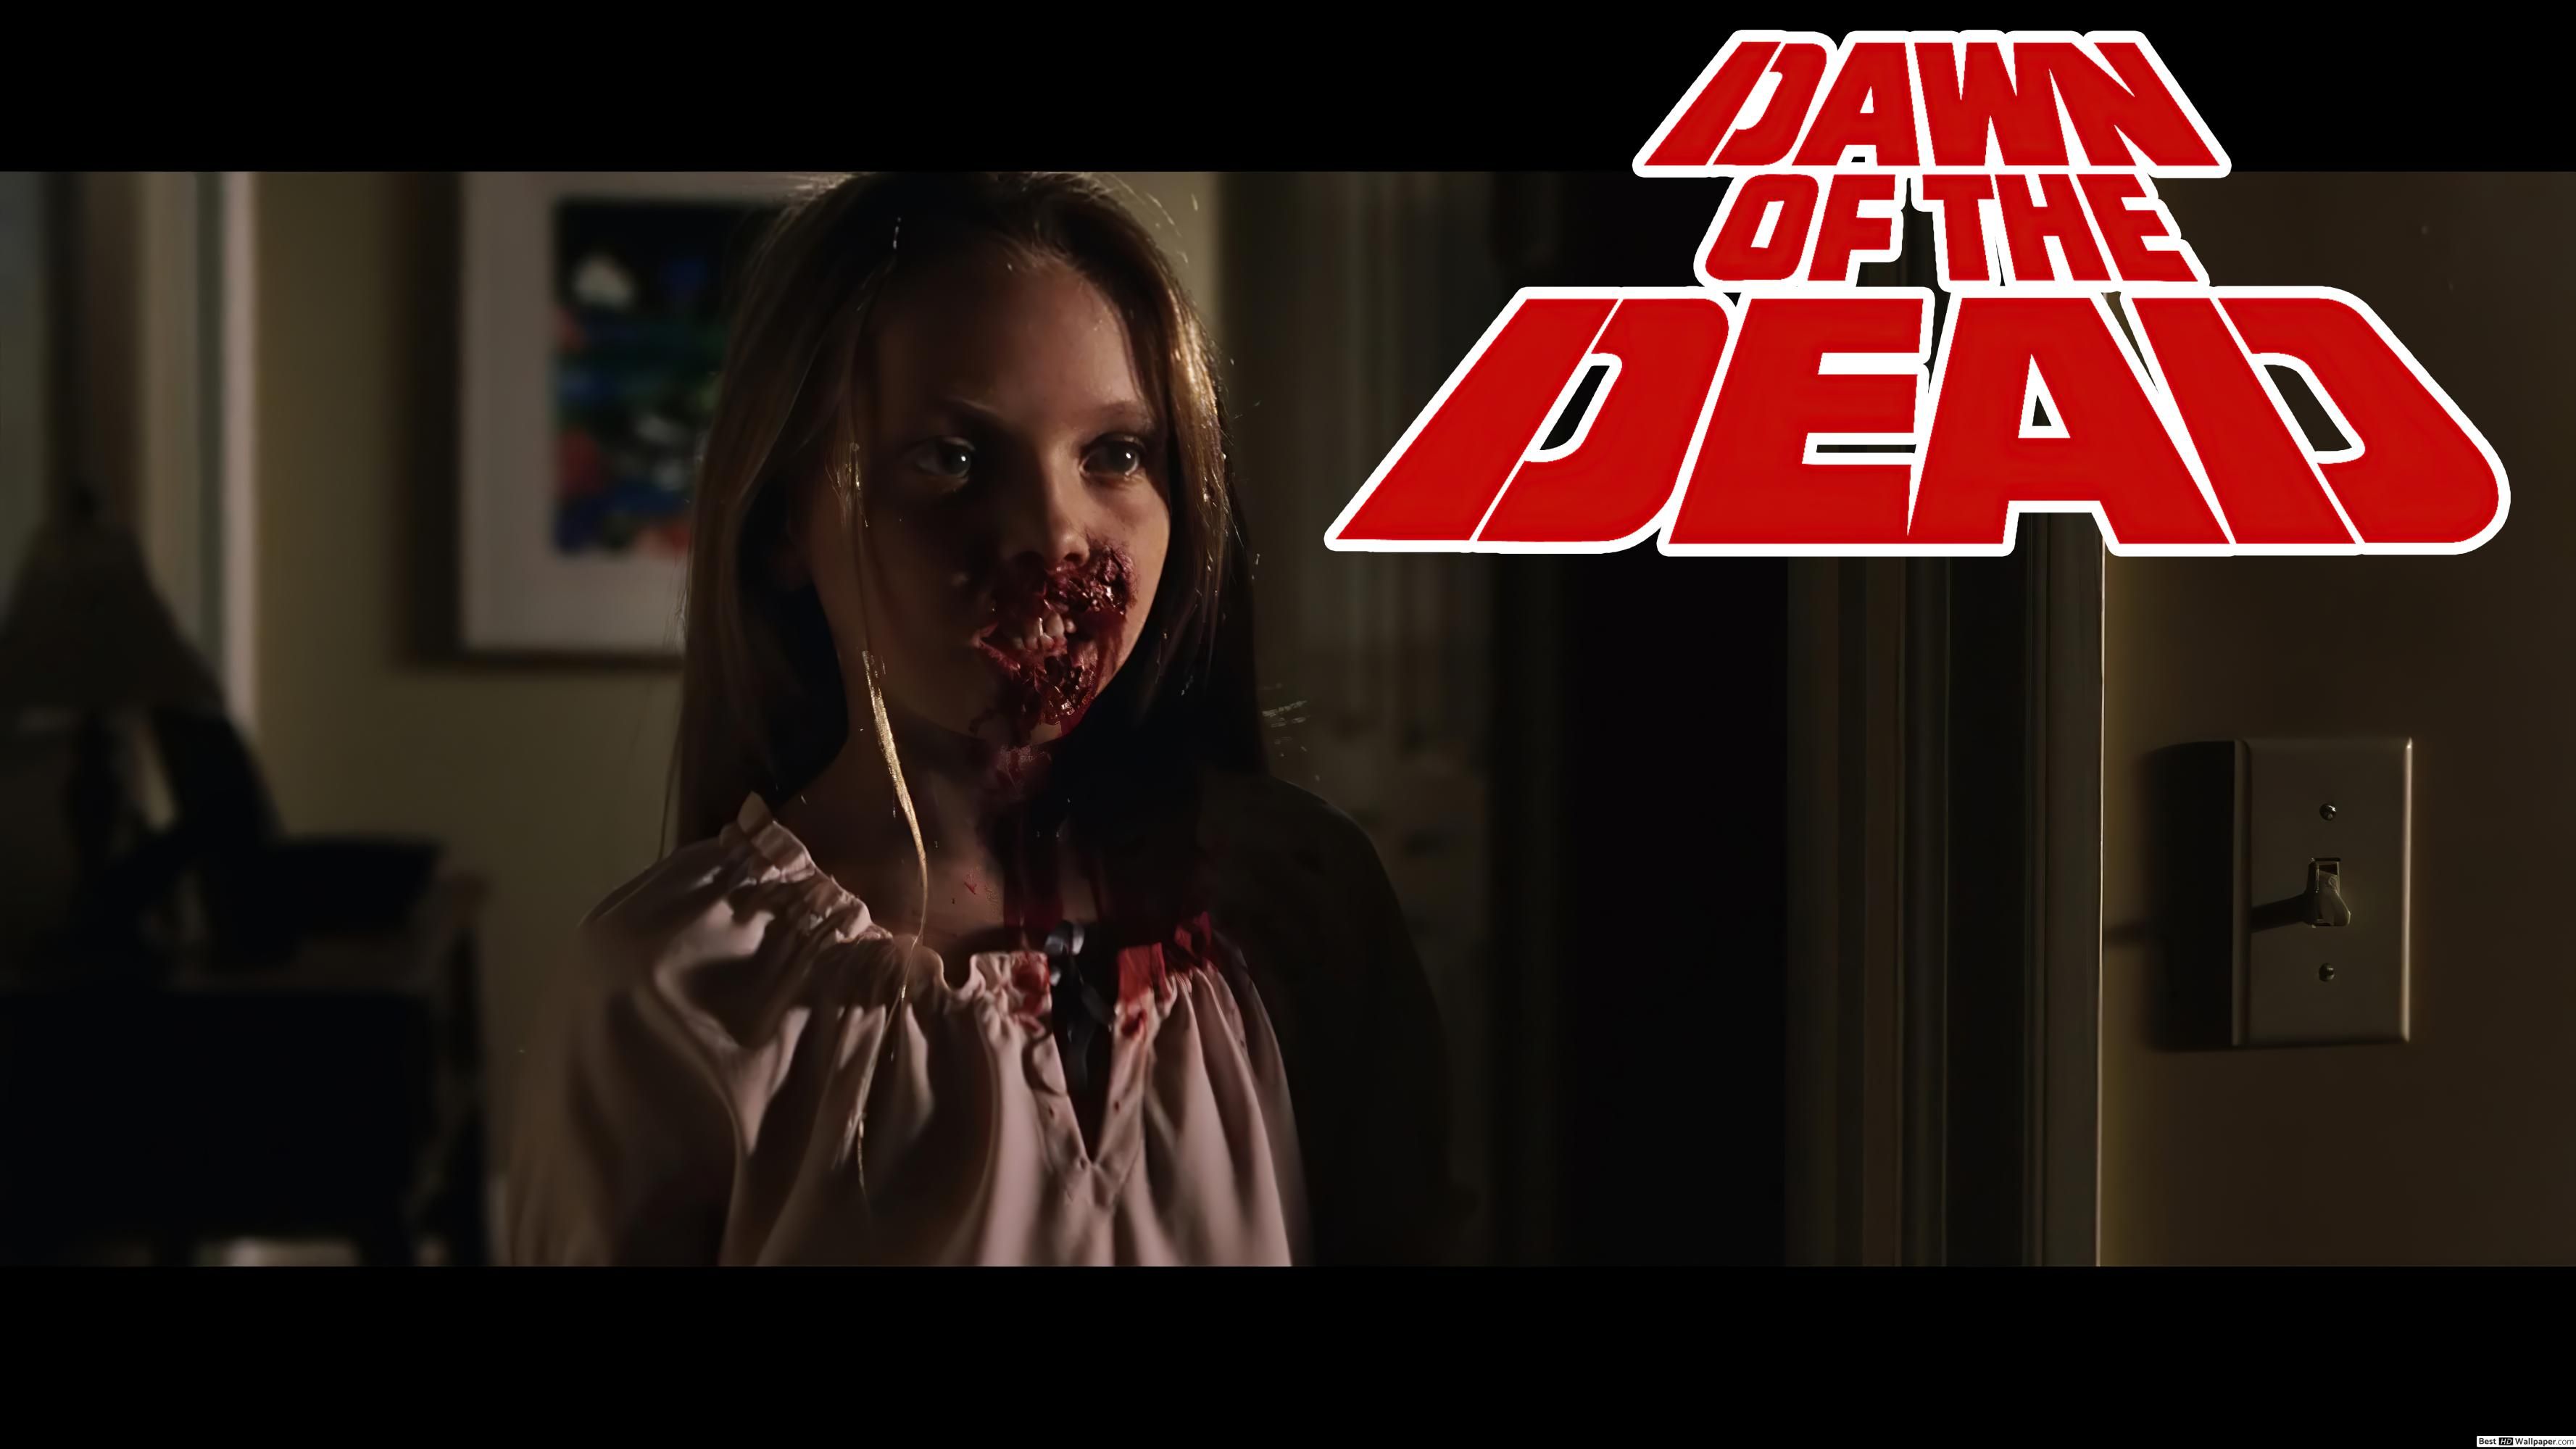 Dawn of the Dead 2004 Girl Zombie HD wallpaper download